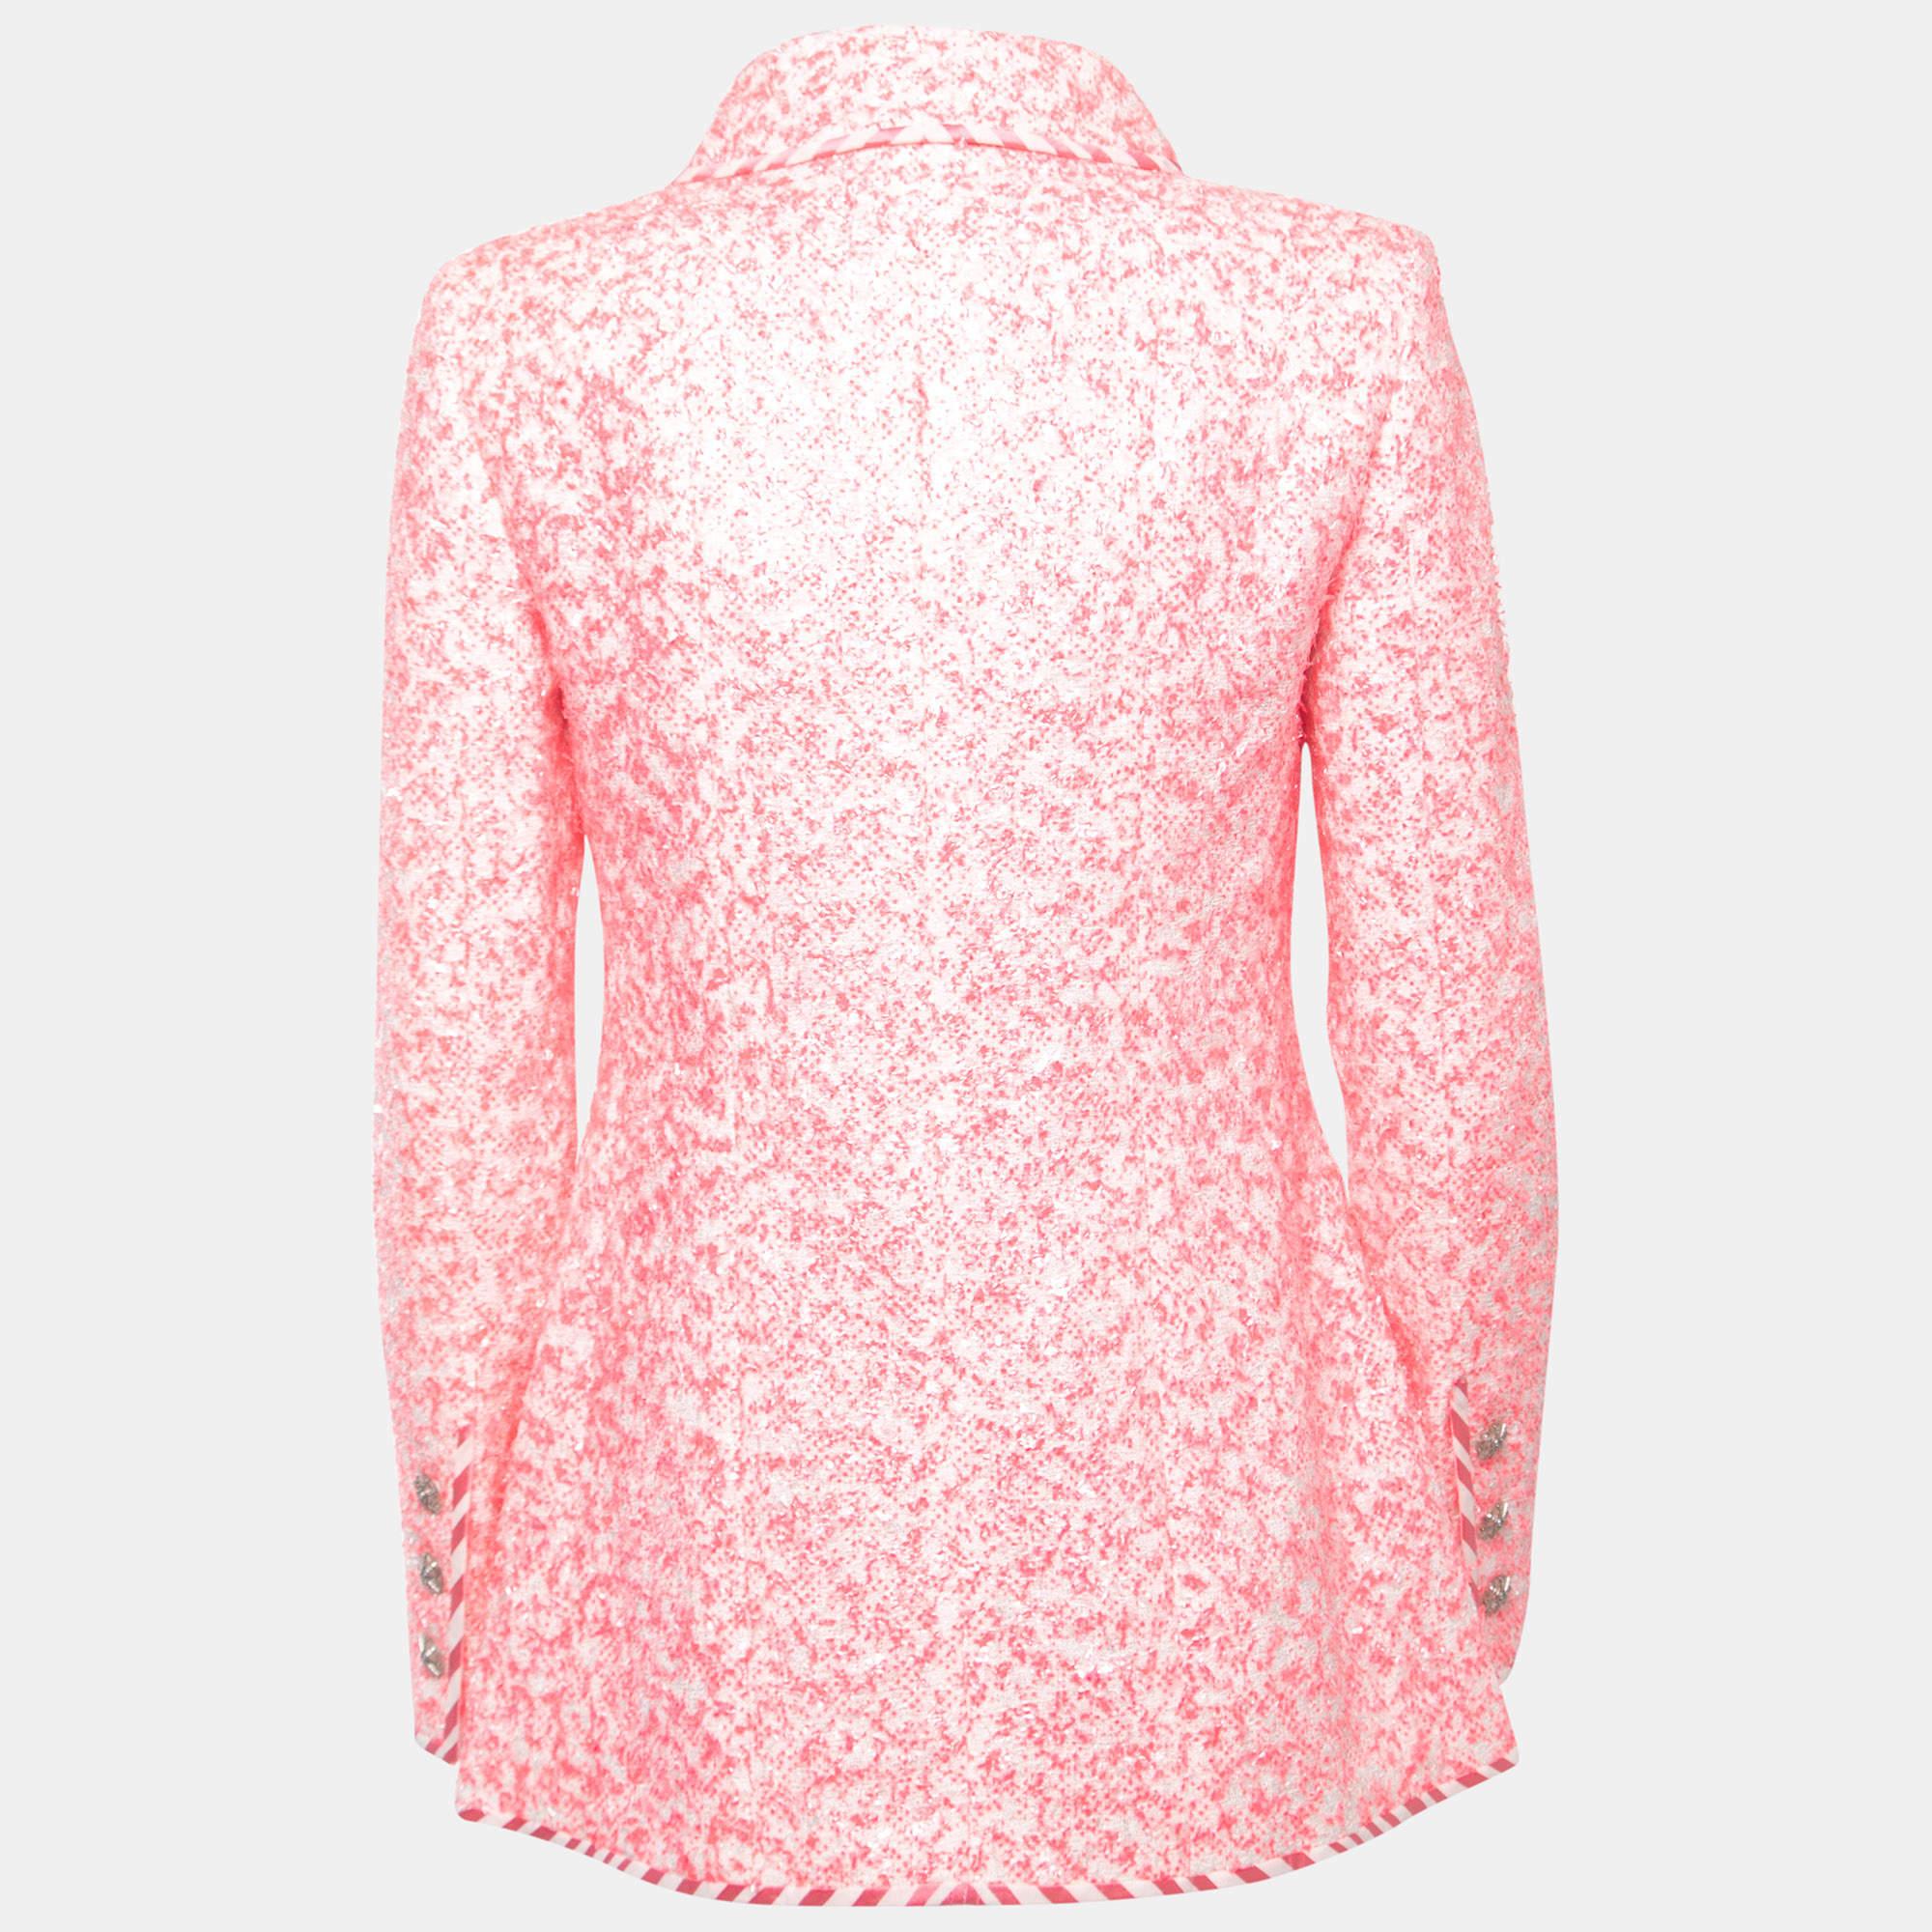 The Chanel jacket is a chic and stylish outerwear piece. Crafted from high-quality synthetic material, it features a textured design in a soft pink hue. The jacket is adorned with a front zipper closure, making it easy to put on and take off. With